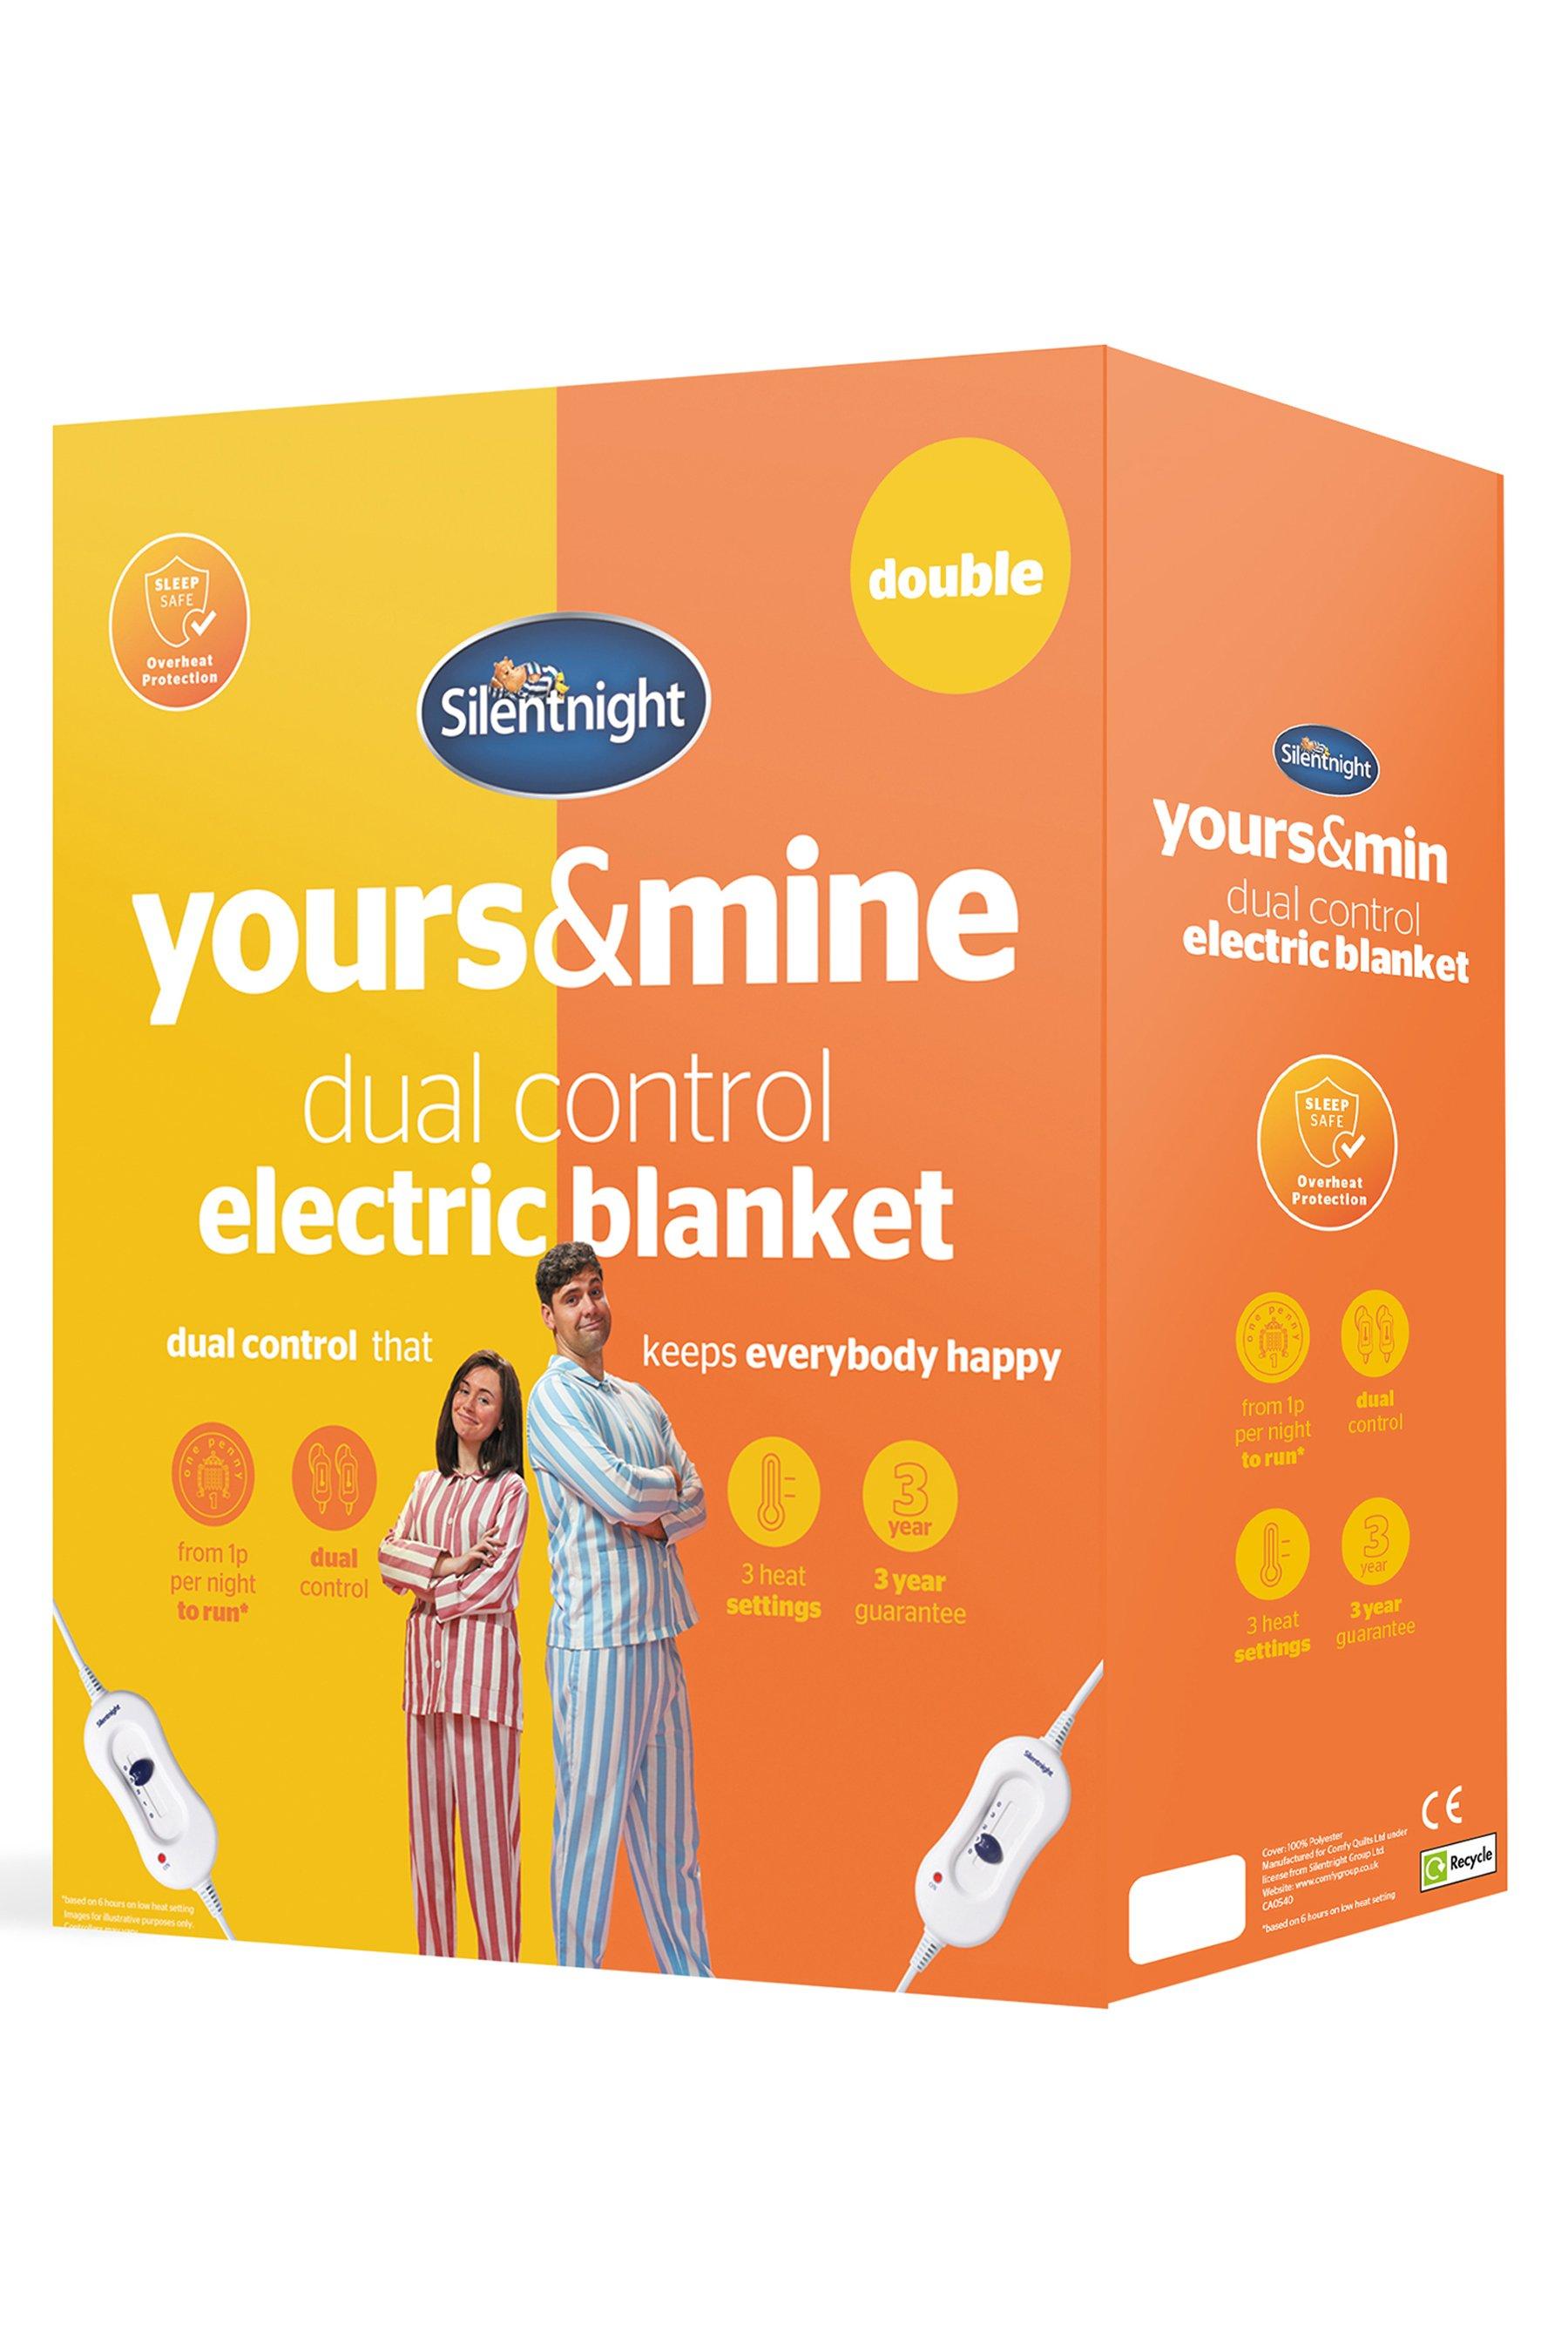 Control　and　Studio　Mine　Yours　Electric　Blanket　Silentnight　Dual